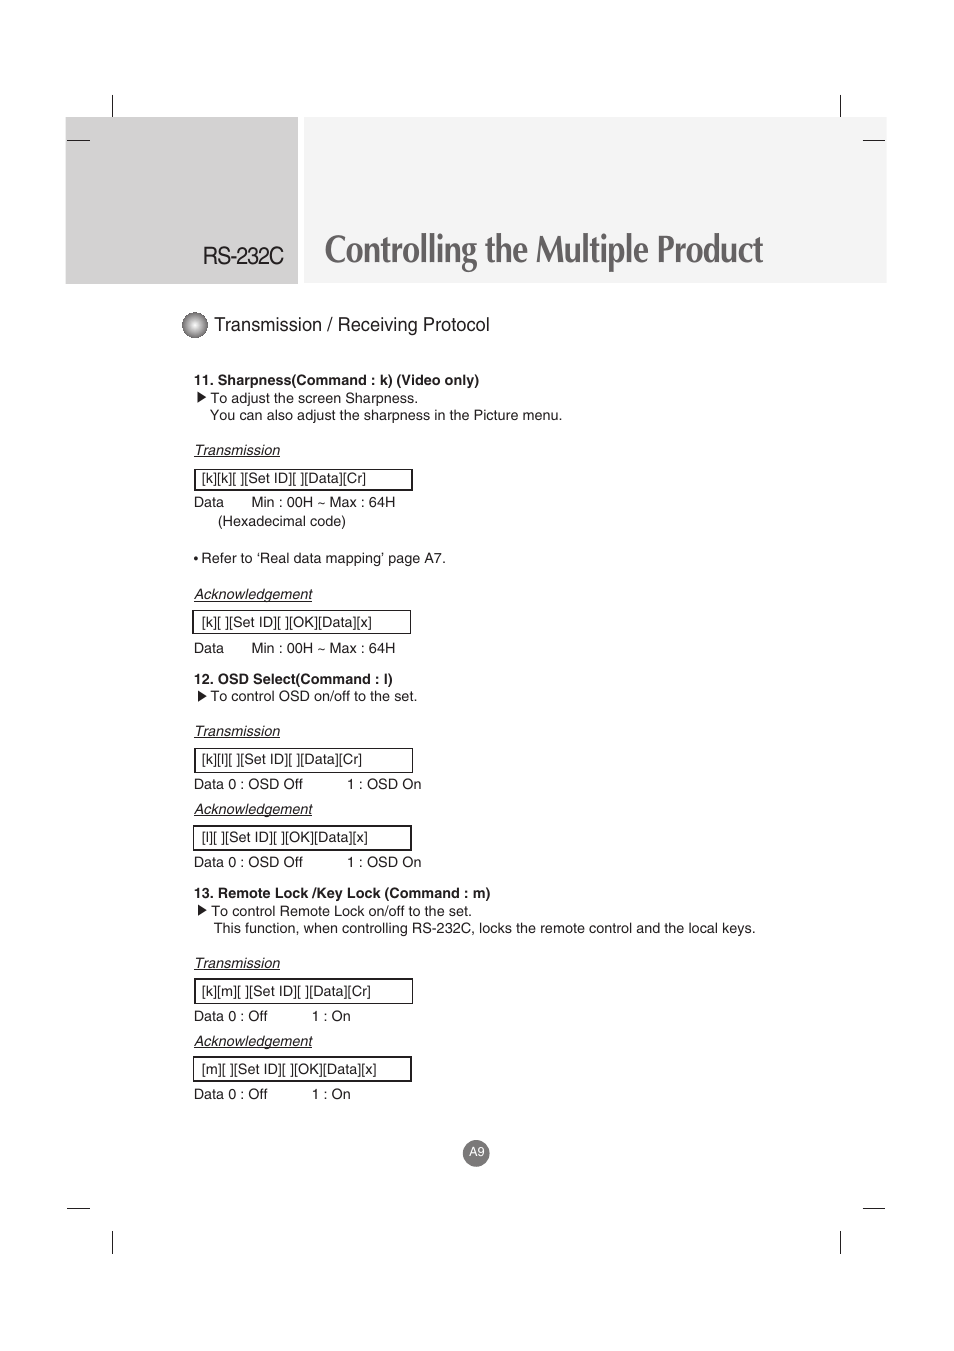 Controlling the multiple product, Rs-232c, Transmission / receiving protocol | LG M3202C-BA User Manual | Page 49 / 68